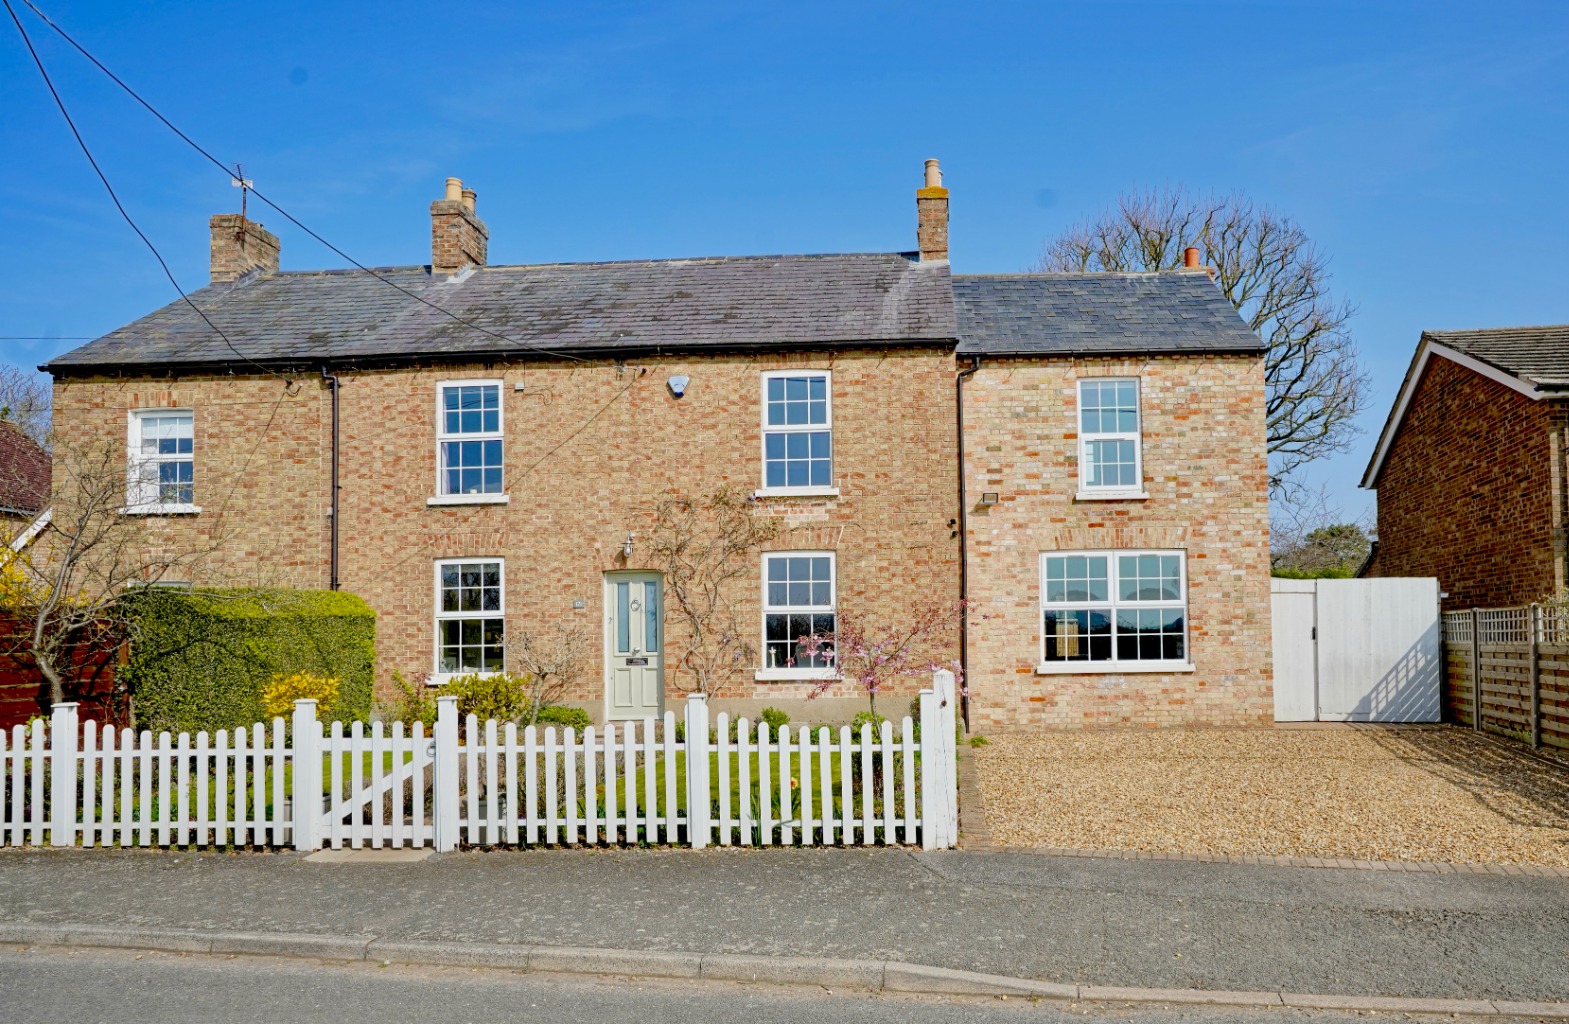 Location, Location, Location! This is a very rare opportunity indeed, and a chance for the right buyer to acquire this stunning, Victorian semi-detached house, situated in a village location with open countryside views, and within walking distance of the highly regarded local pub.